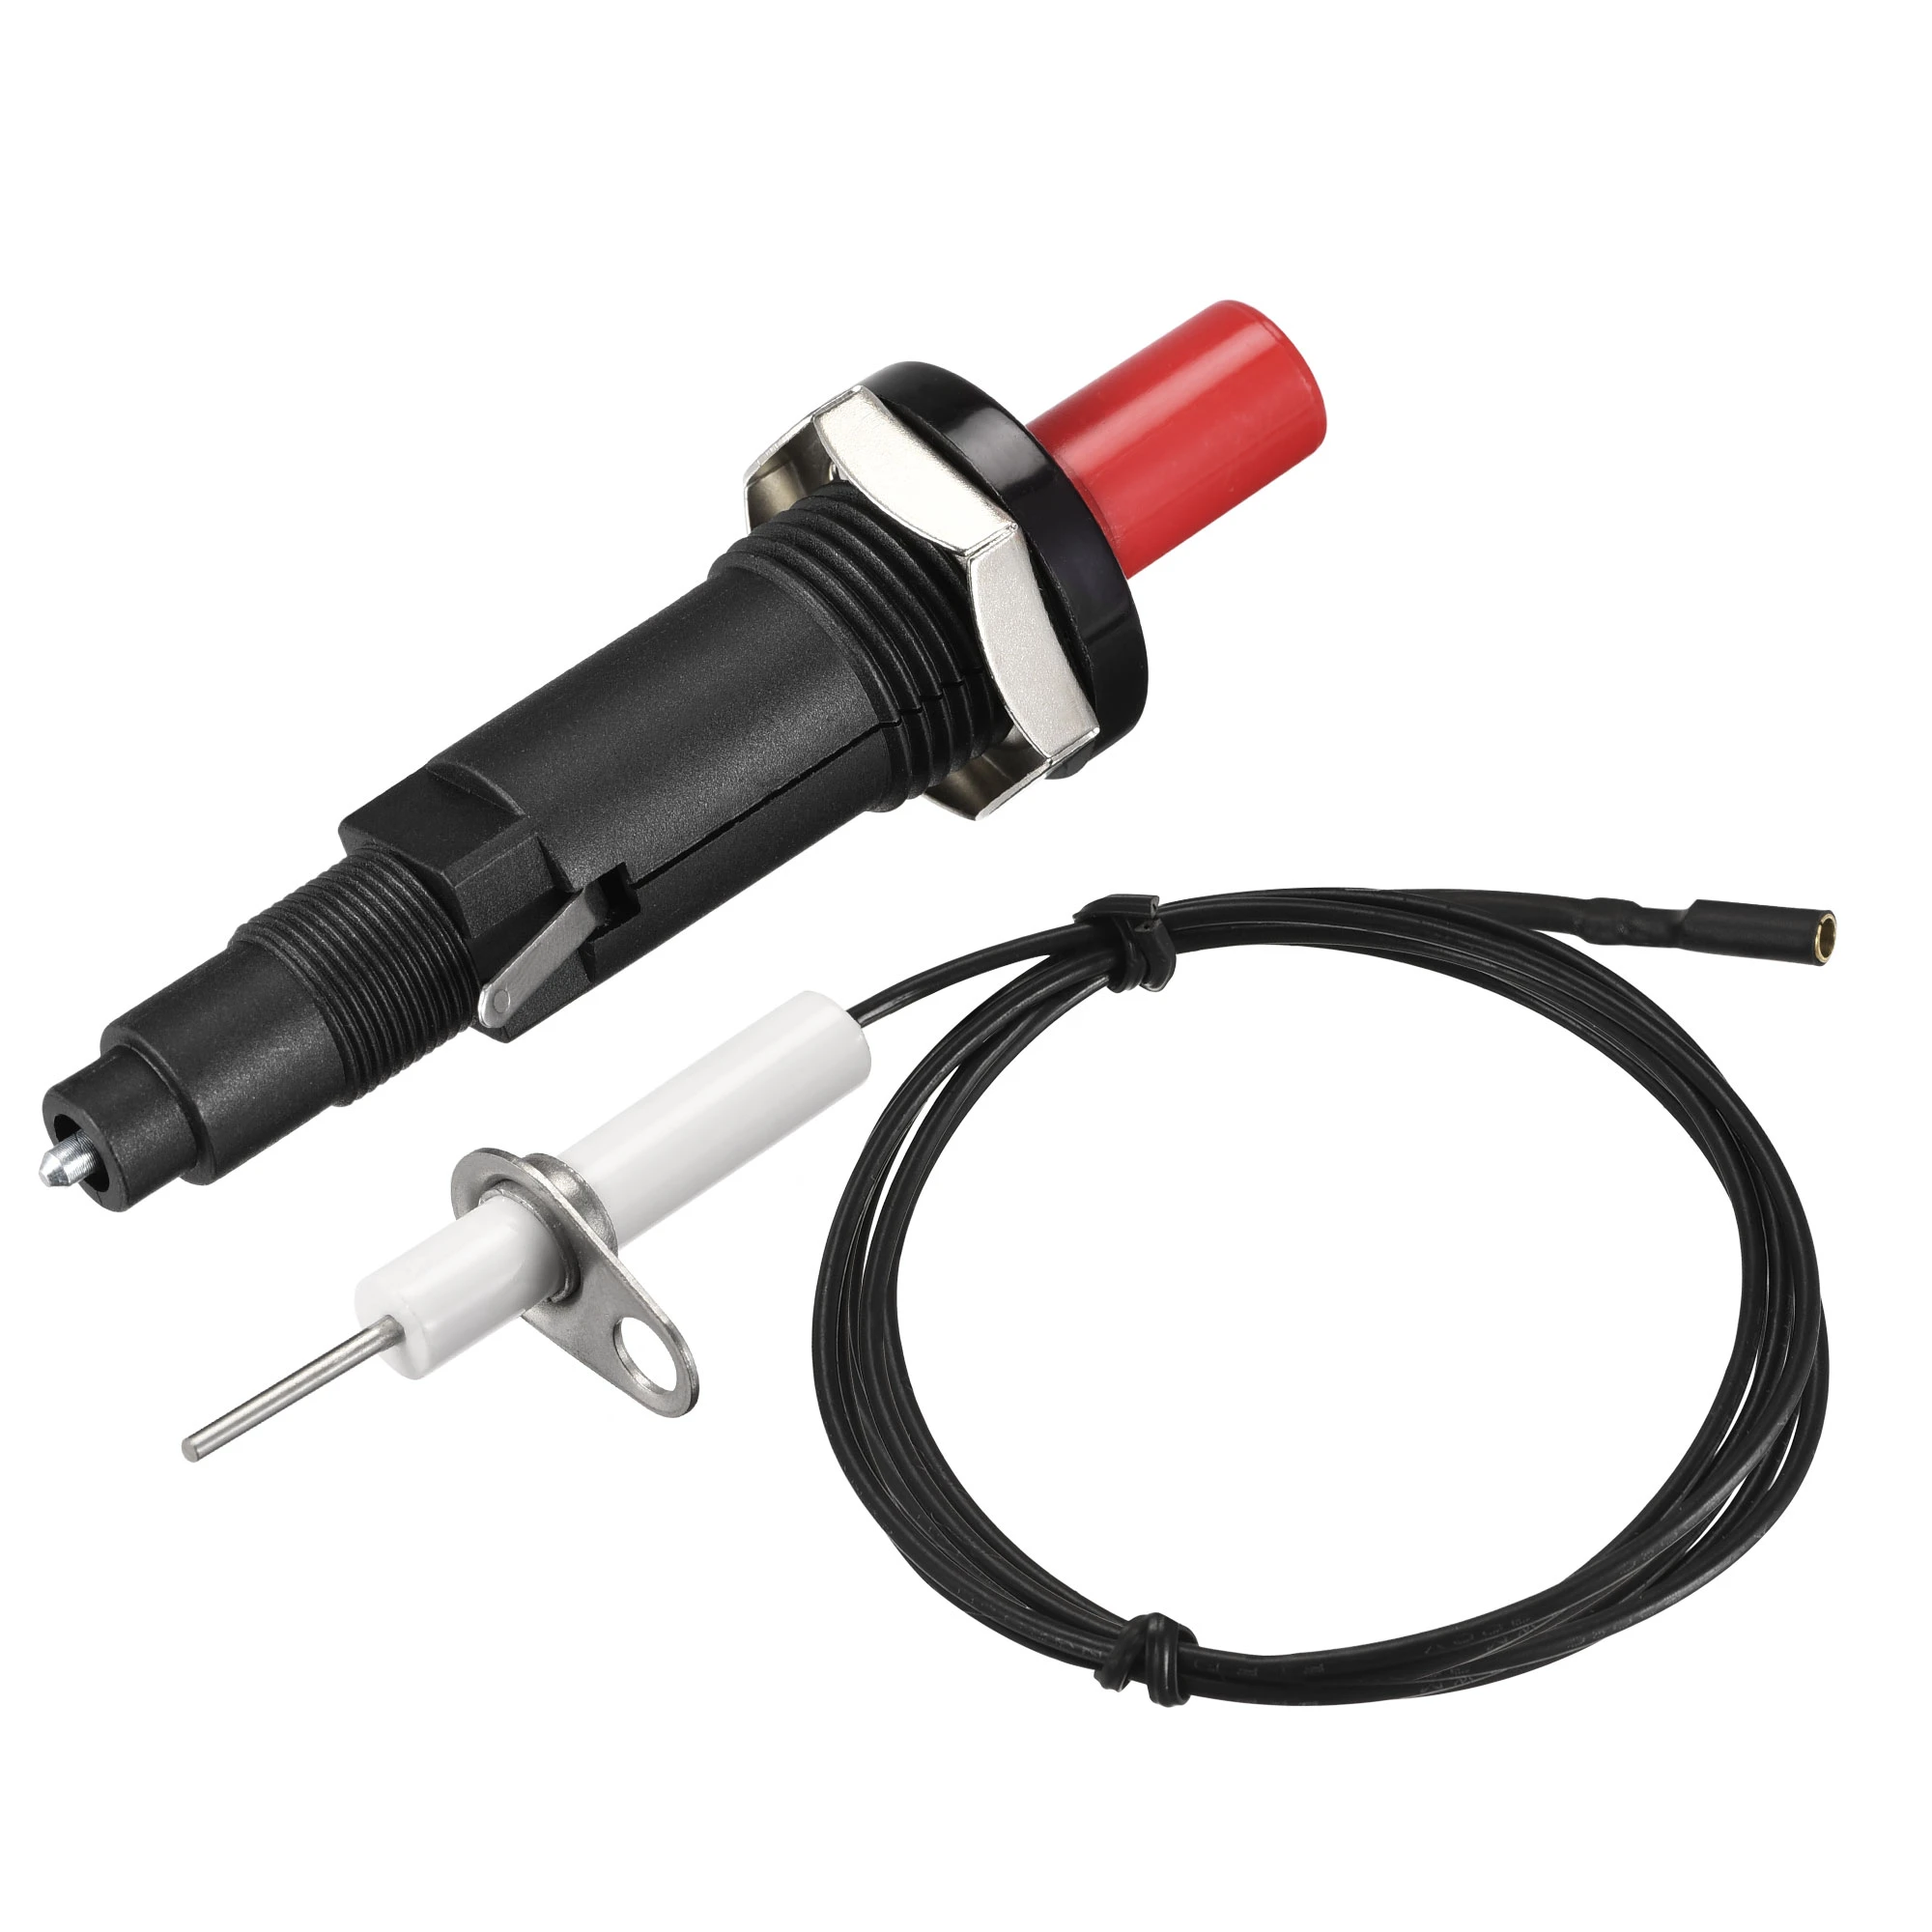 Cable 1000mm Gas Grill Push Button Igniter Universal Piezo Spark Ignition Kit